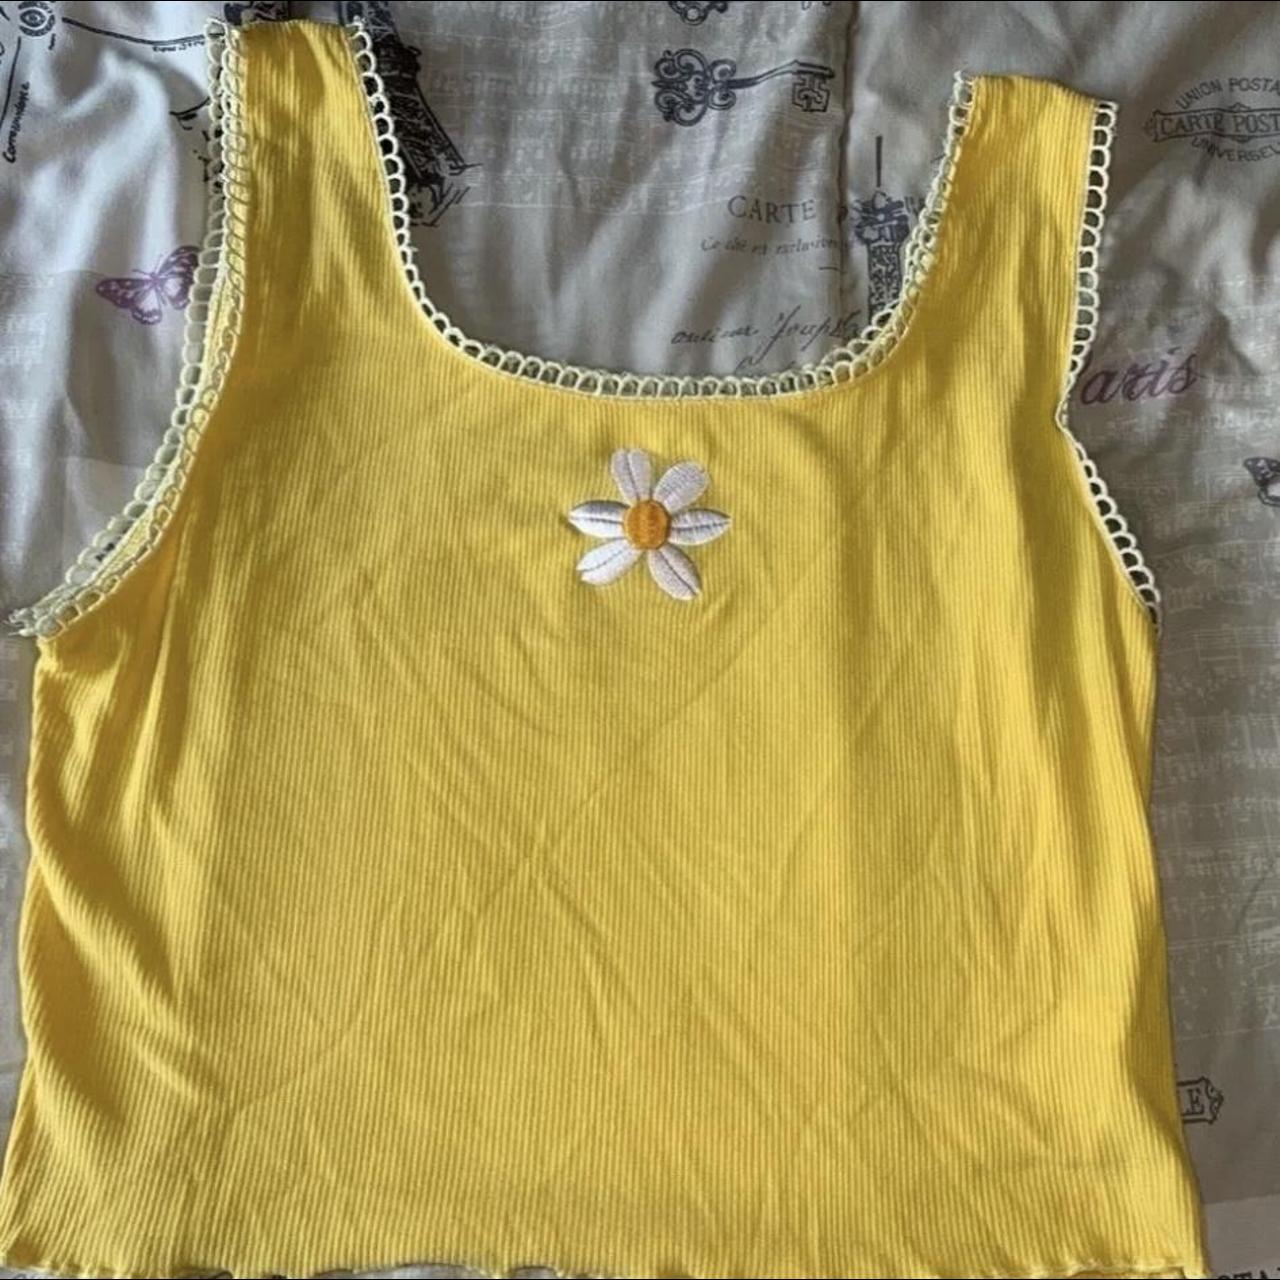 Flower Embroidery Lettuce Trim Yellow Square Neck... - Depop